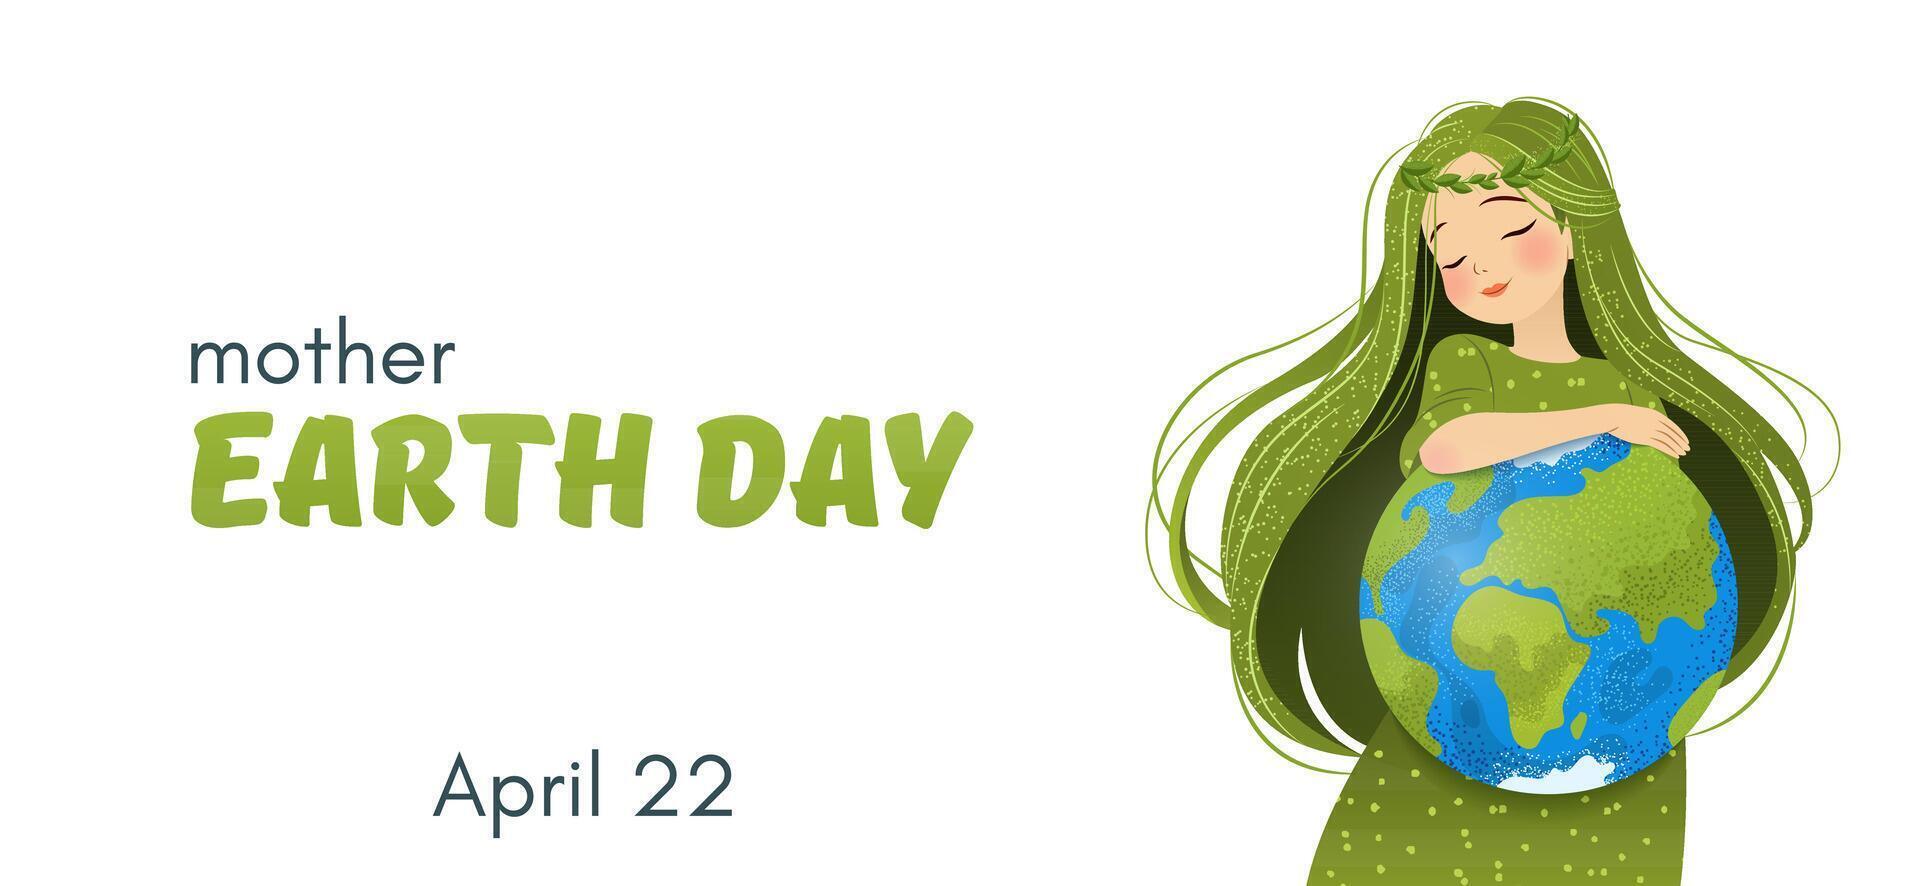 Happy Mother Earth Day. Environmental protection. Horizontal banner with woman, planet Earth and slogan. Caring for Nature. Vector illustration for banner, social media post, celebration card.